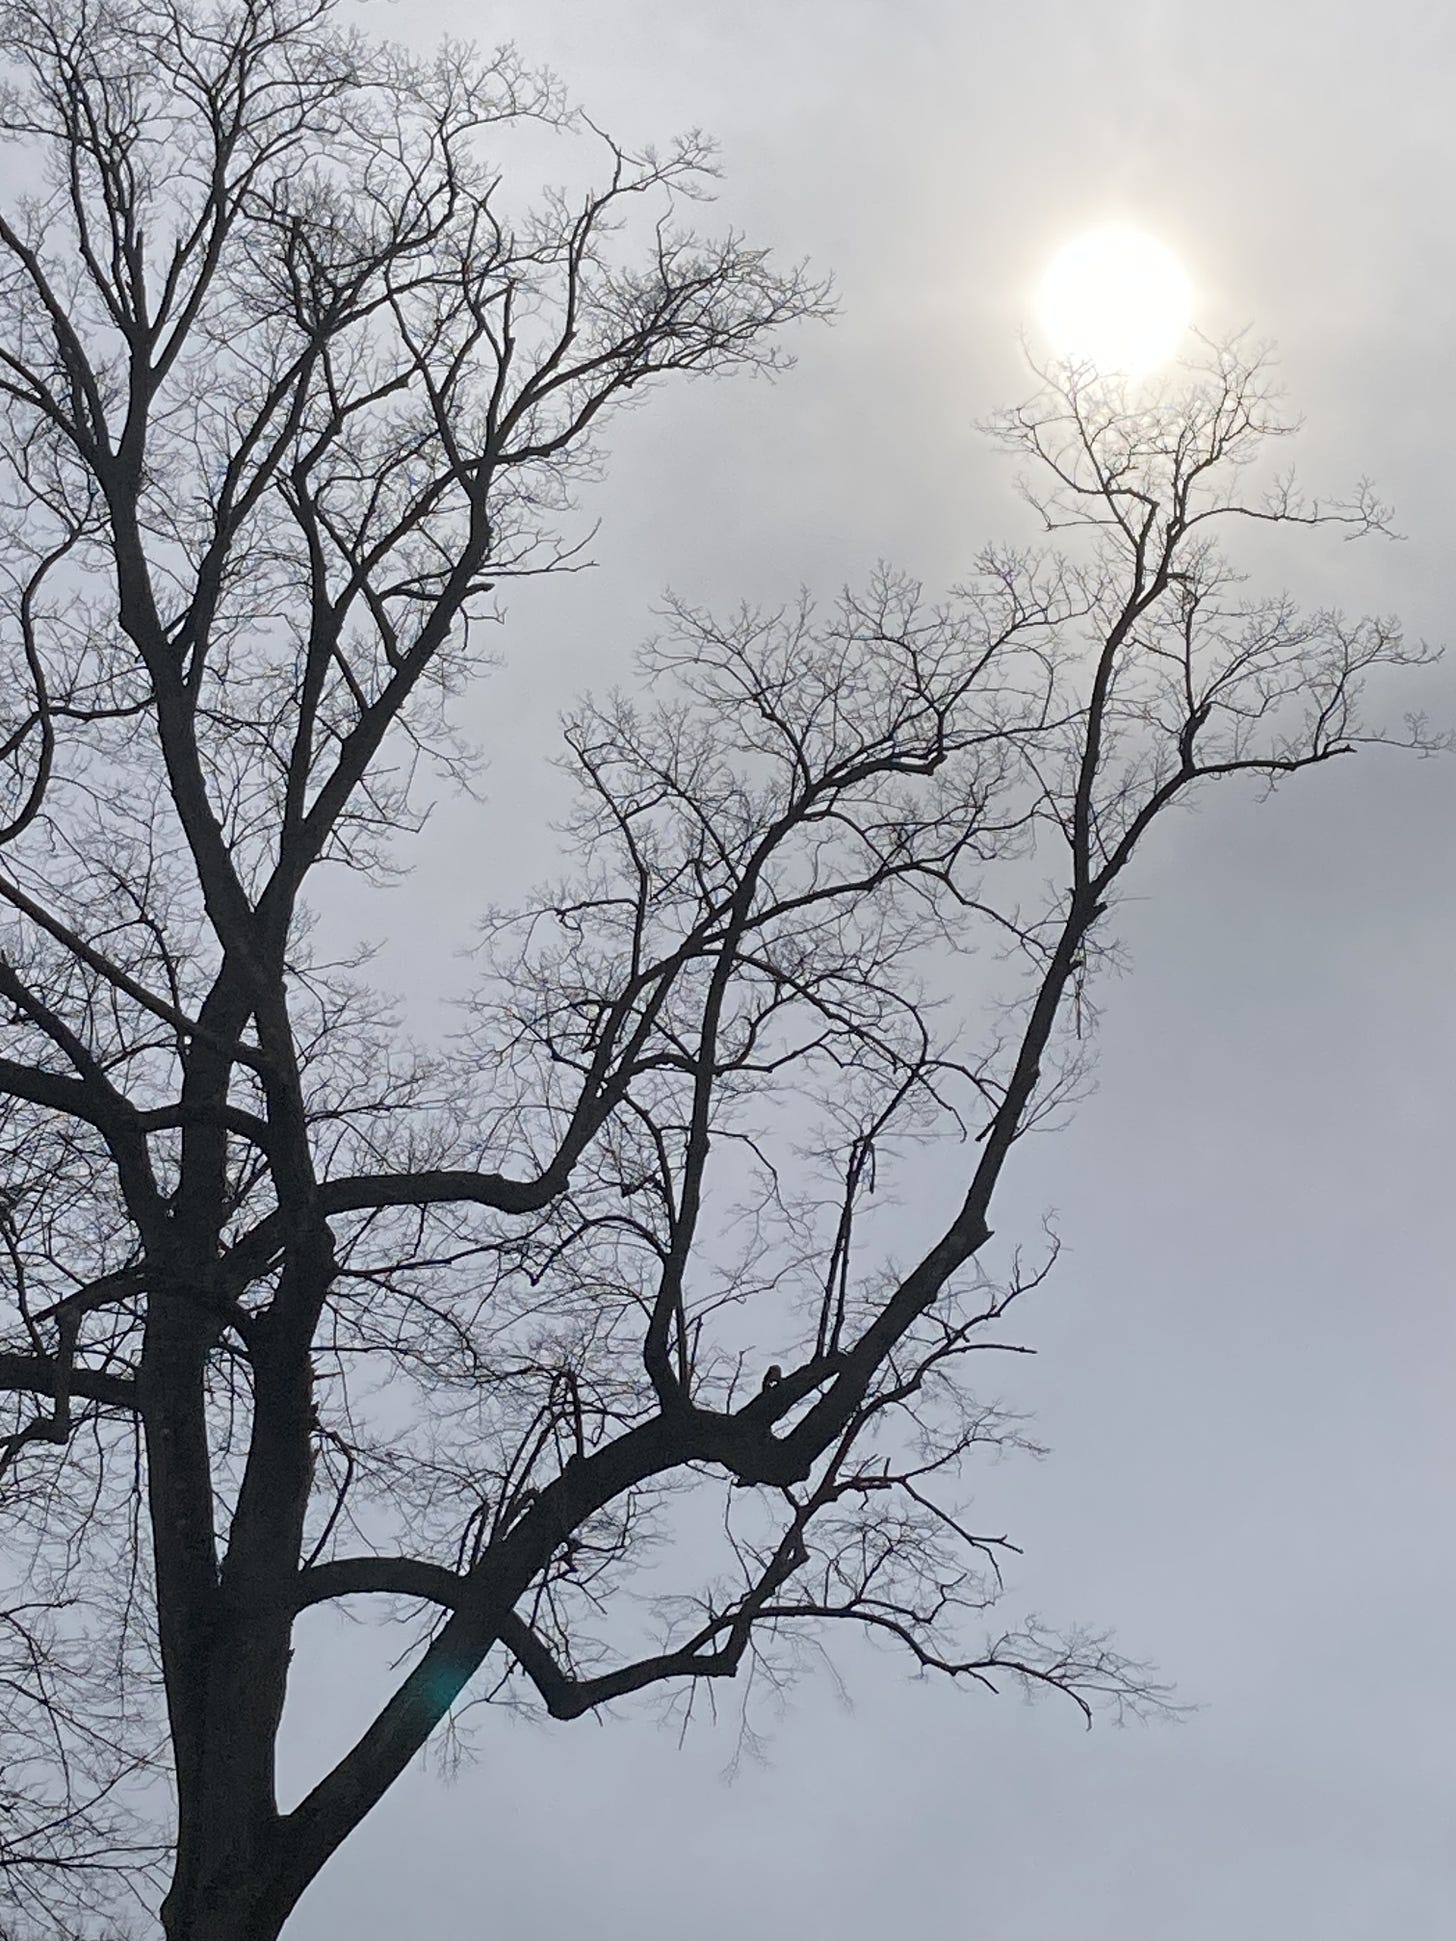 photograph of the silhouette of a tall, bare tree seeming to hold up the sun in a hazy sky